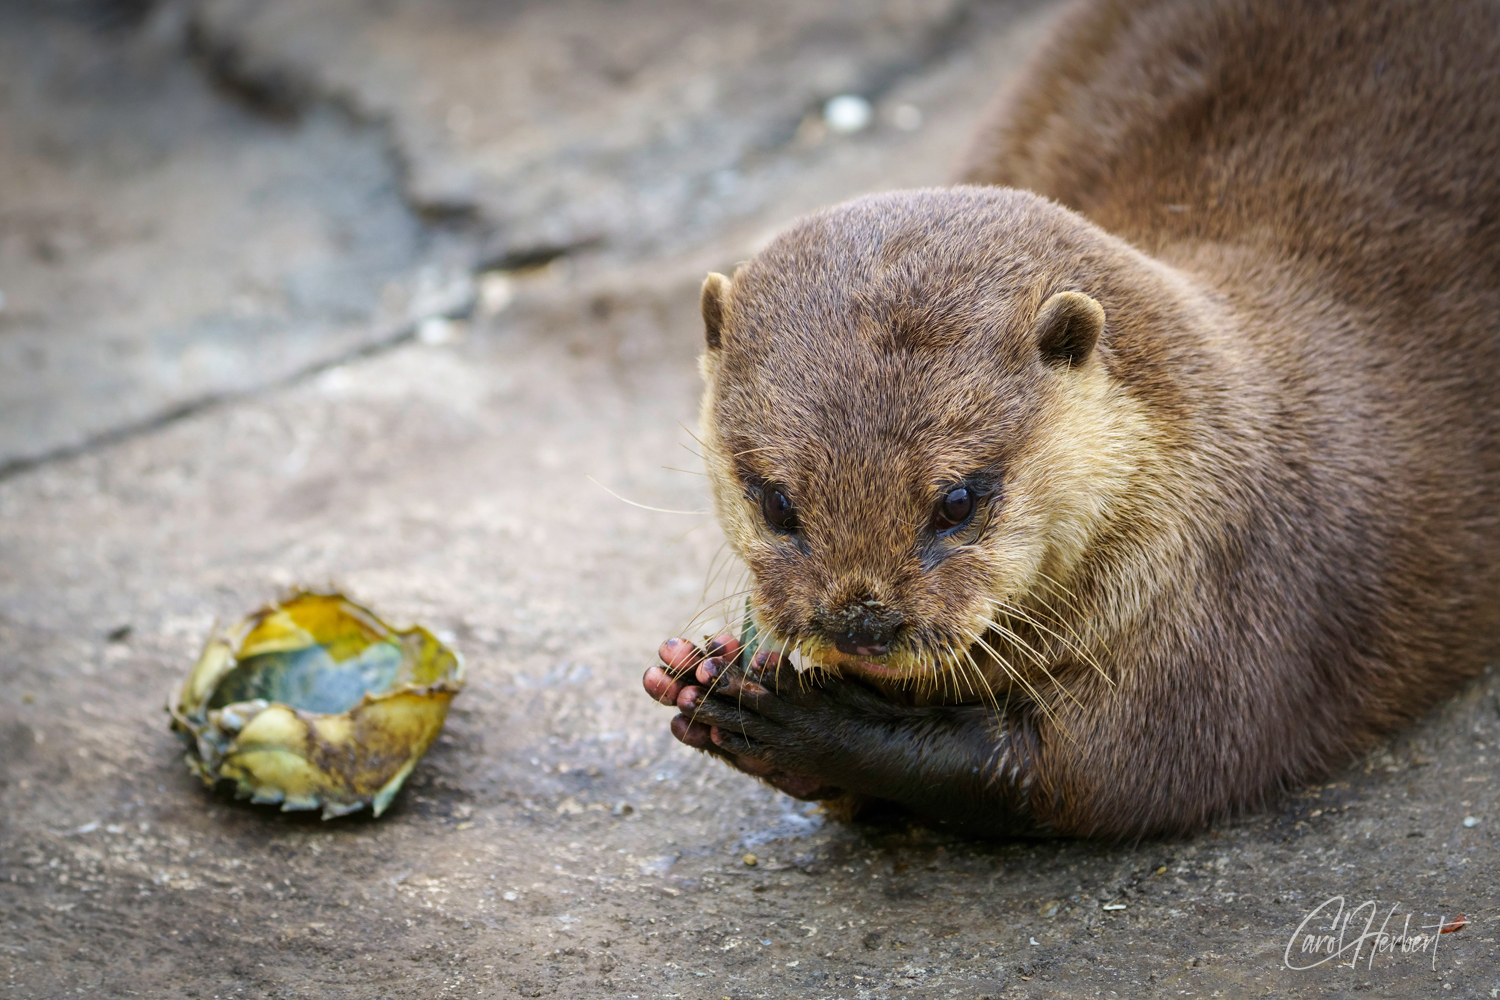 An Otter Eating Crab